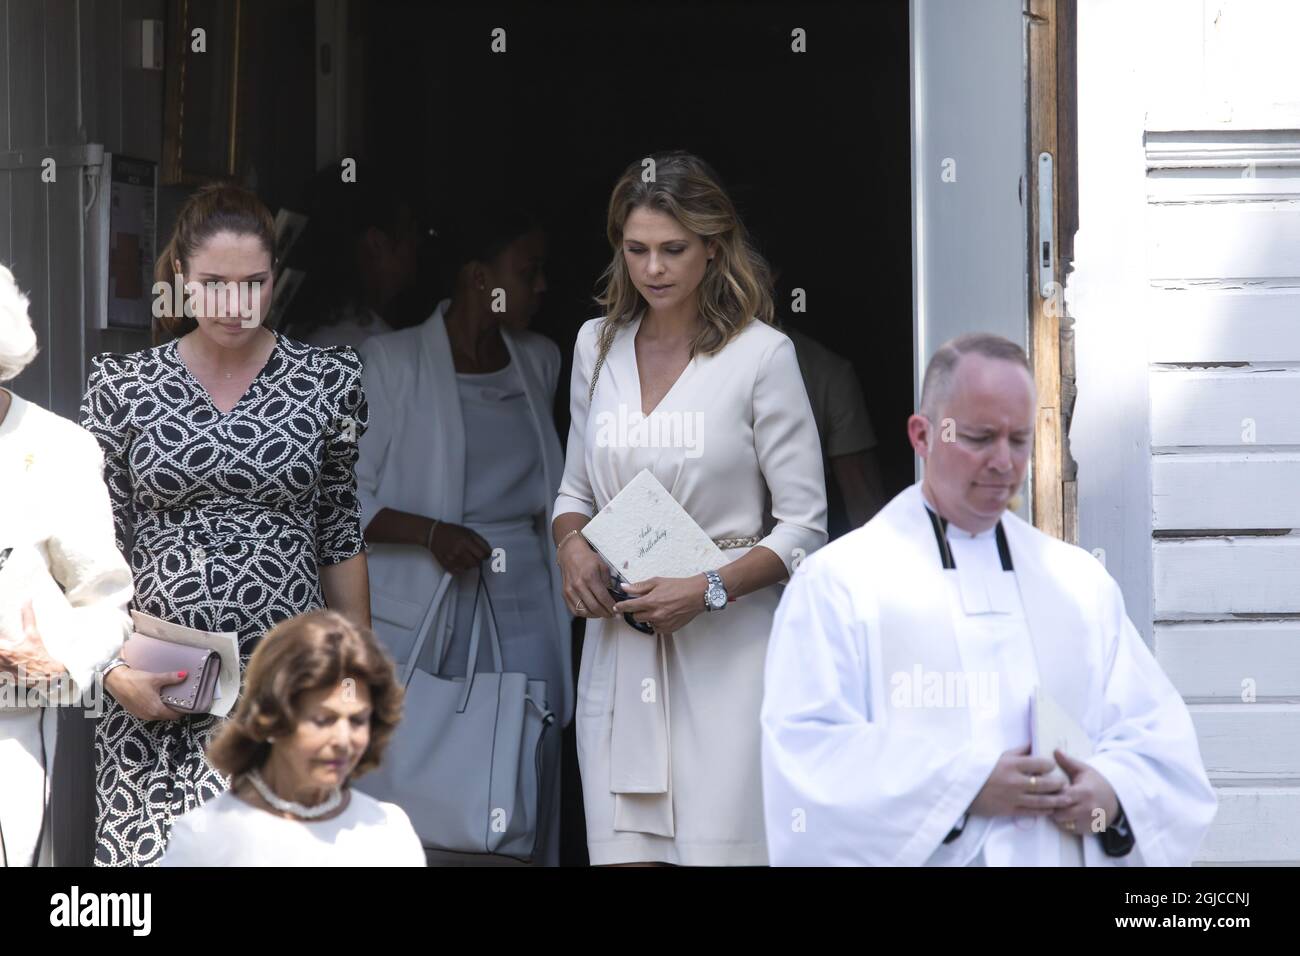 Louise Thott formerly Gottlieb and Princesss Madeleine Funeral of Anki Wallenberg in Dalaro church, Stockholm, Sweden 19 July 2019 Anki Wallenberg died in a sailing accident on the lake Geneva. She resided in London and was a close friend to the Swedish Royal Family. (c) Patrik Ã–sterberg / TT / kod 2857  Stock Photo